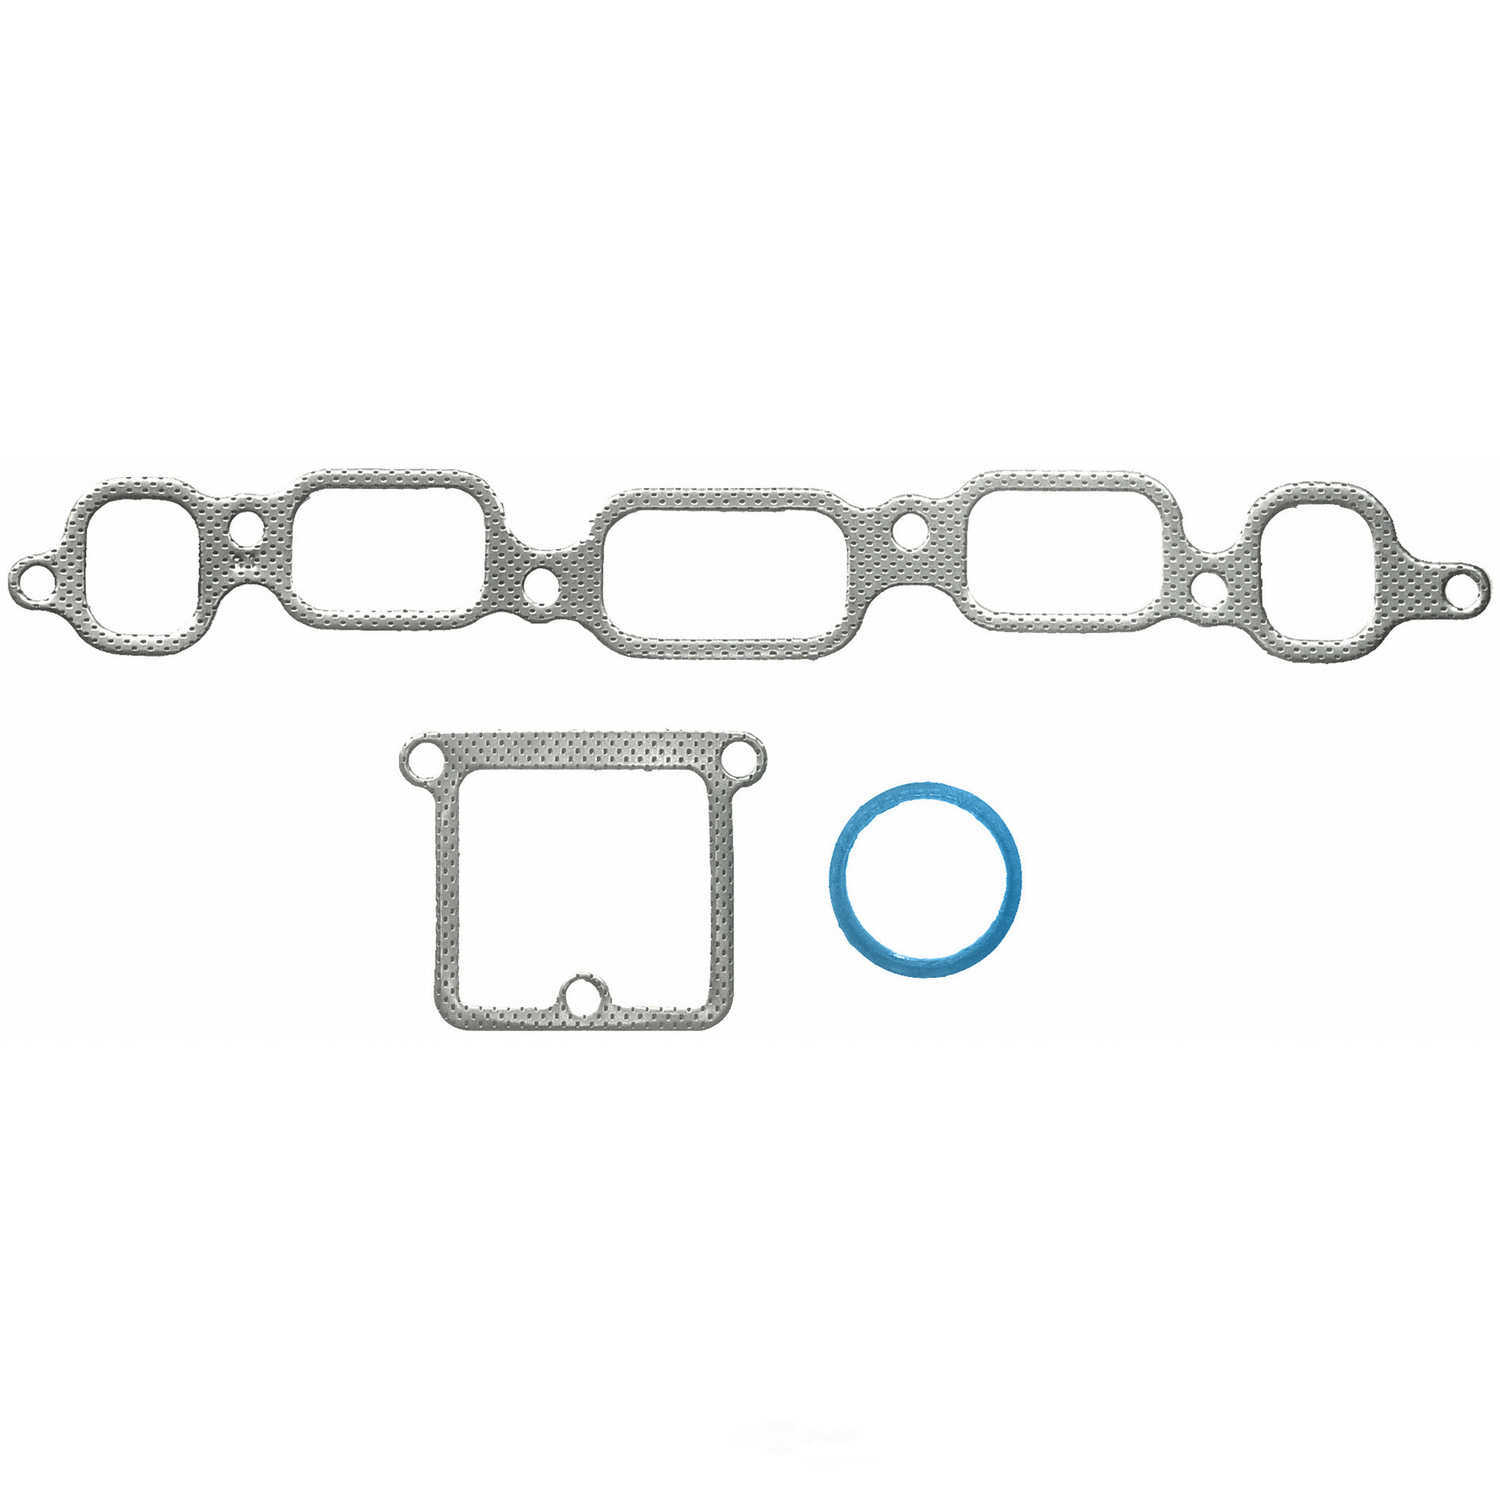 Intake and Exhaust Manifolds Combination Gasket Fel-Pro MS 22506 B